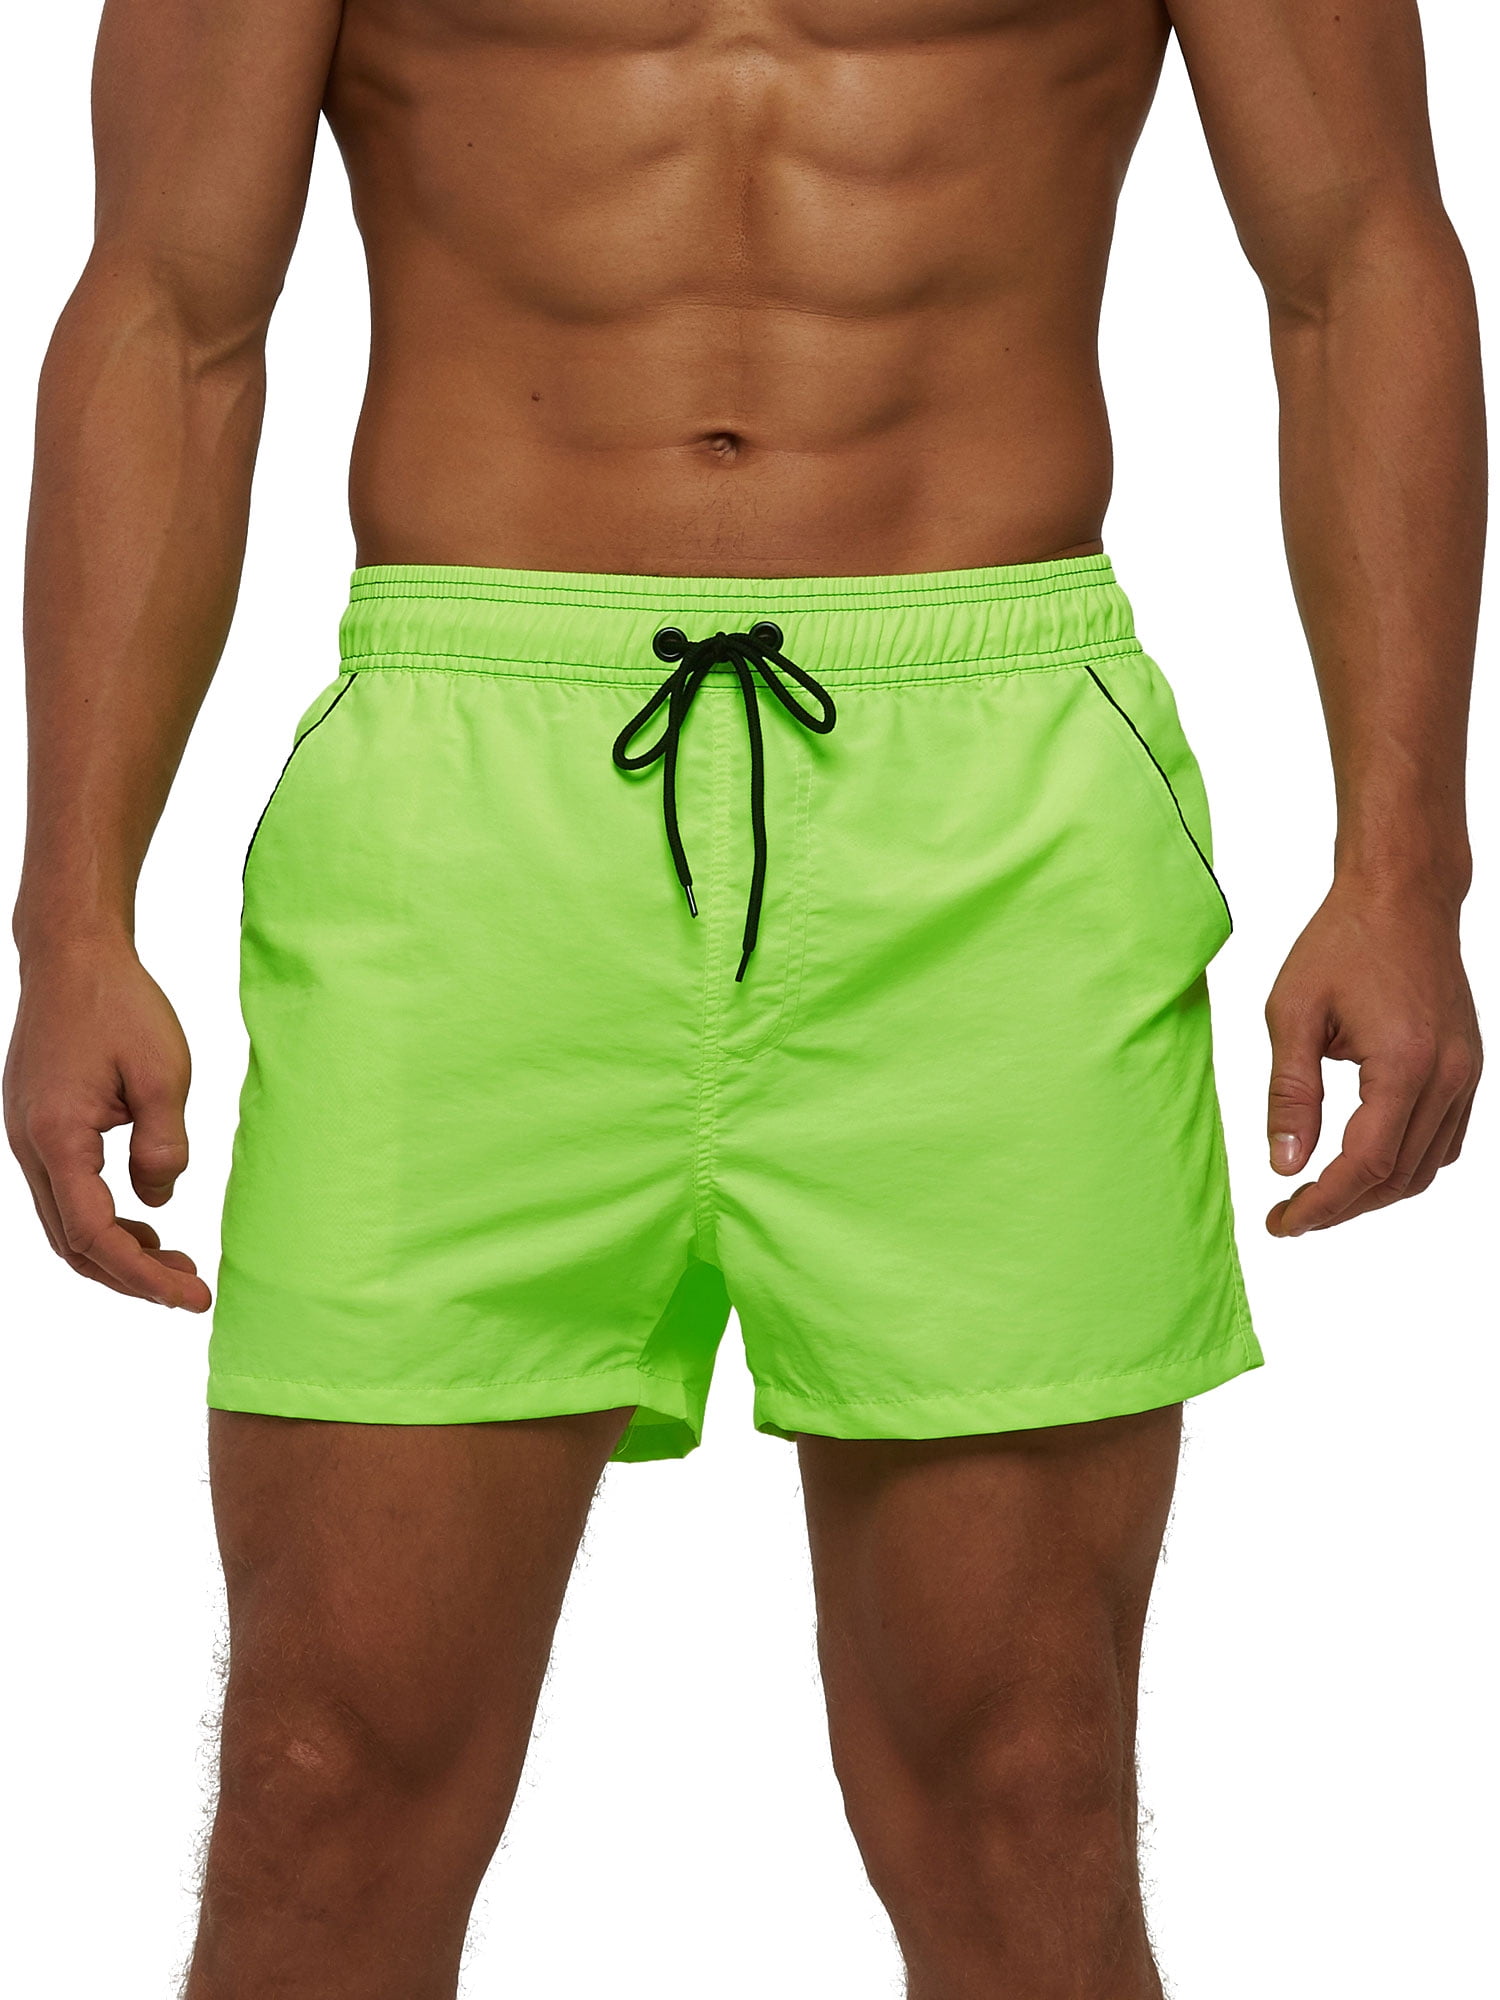 QIQIU Color-Changing Beach Pants Swim Trunks Shorts Summer for Men Temperature-Sensitive Beach Quick-Drying Swimming Trunks 